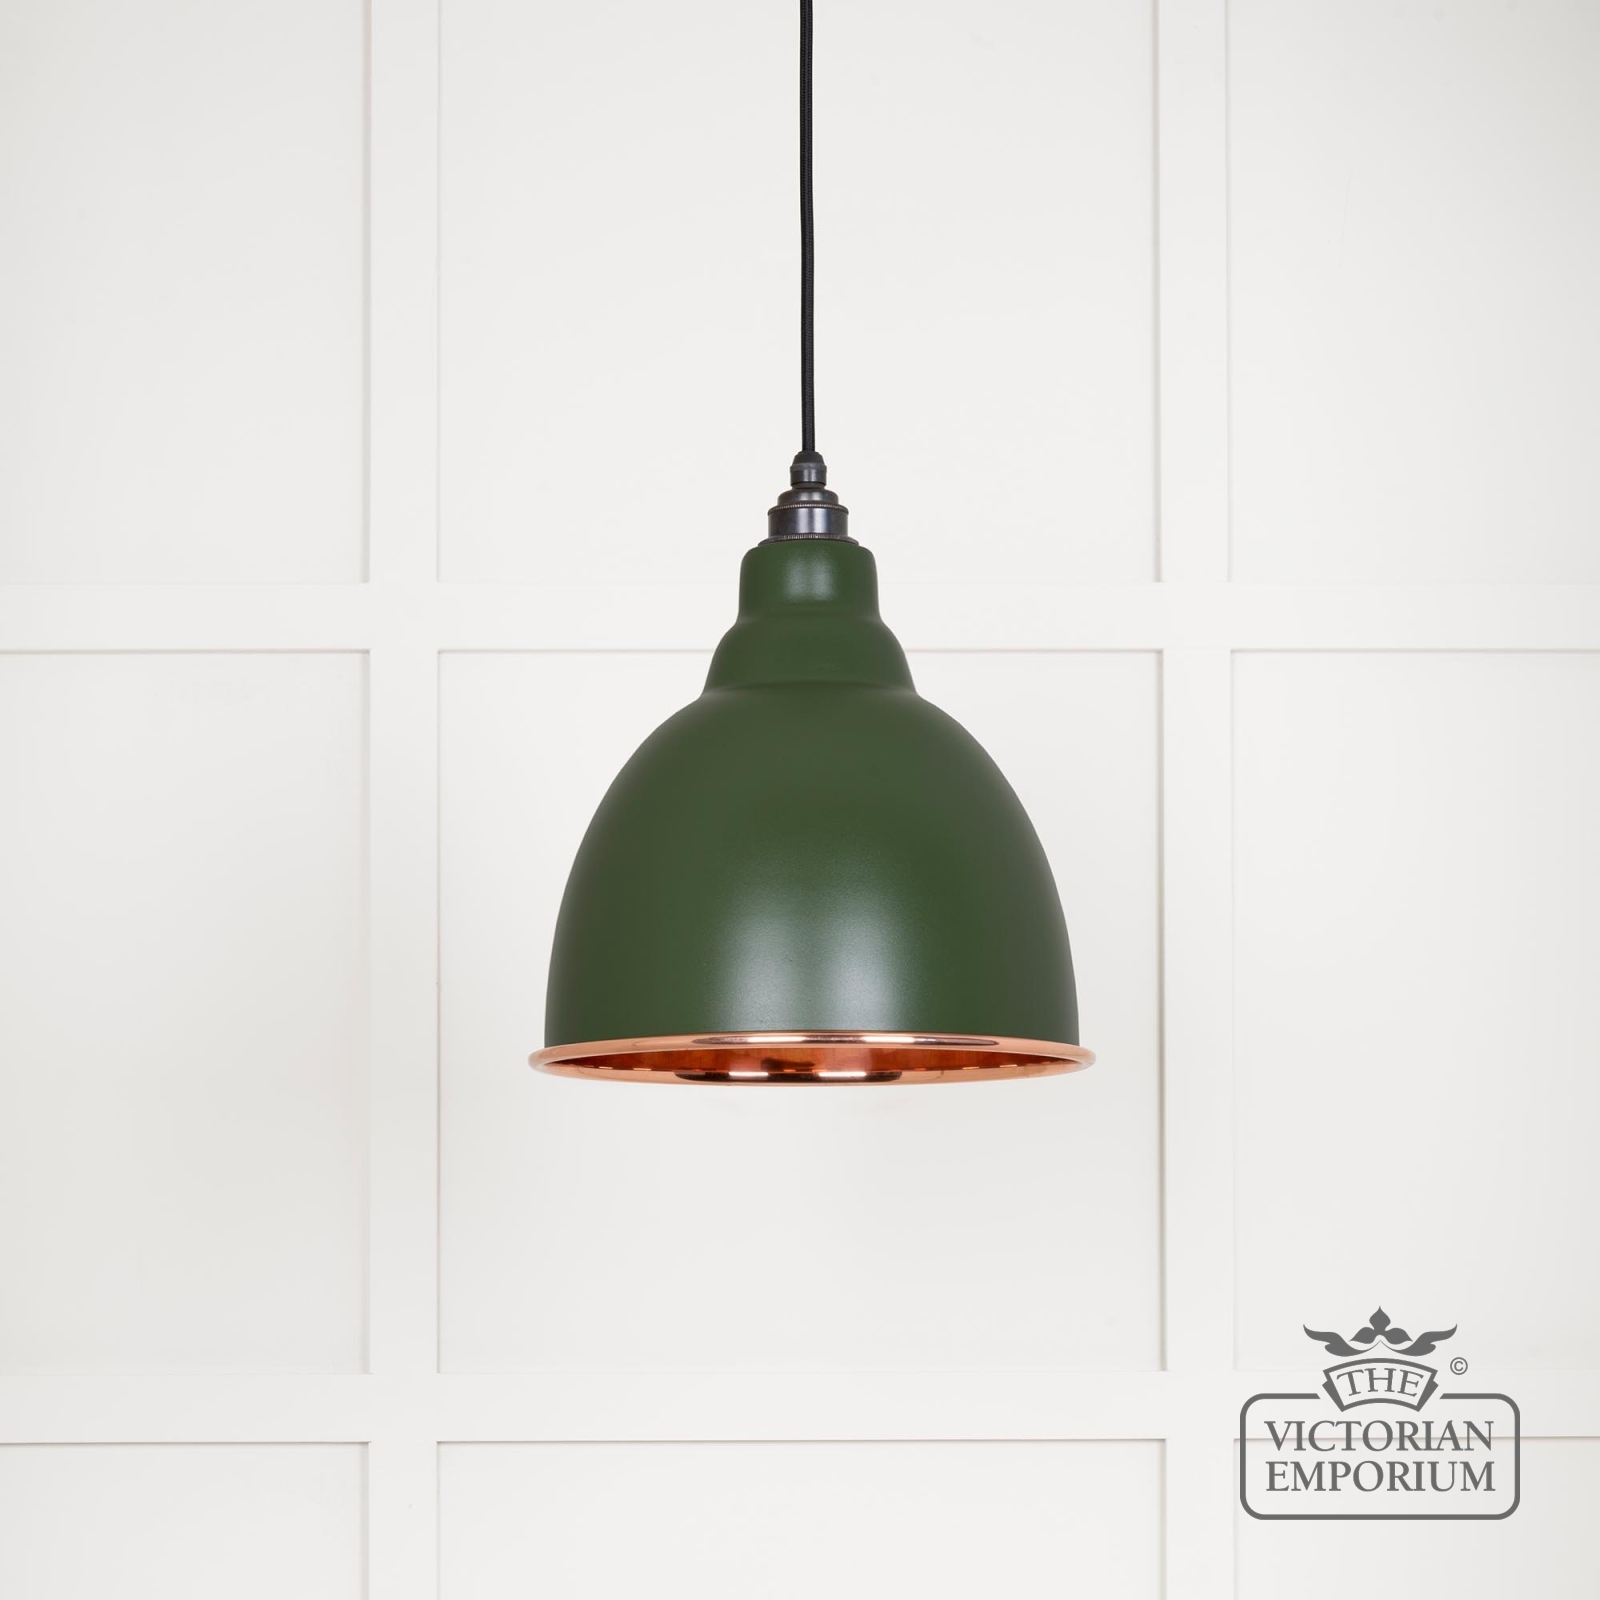 Brindle pendant light in smooth copper with heath exterior